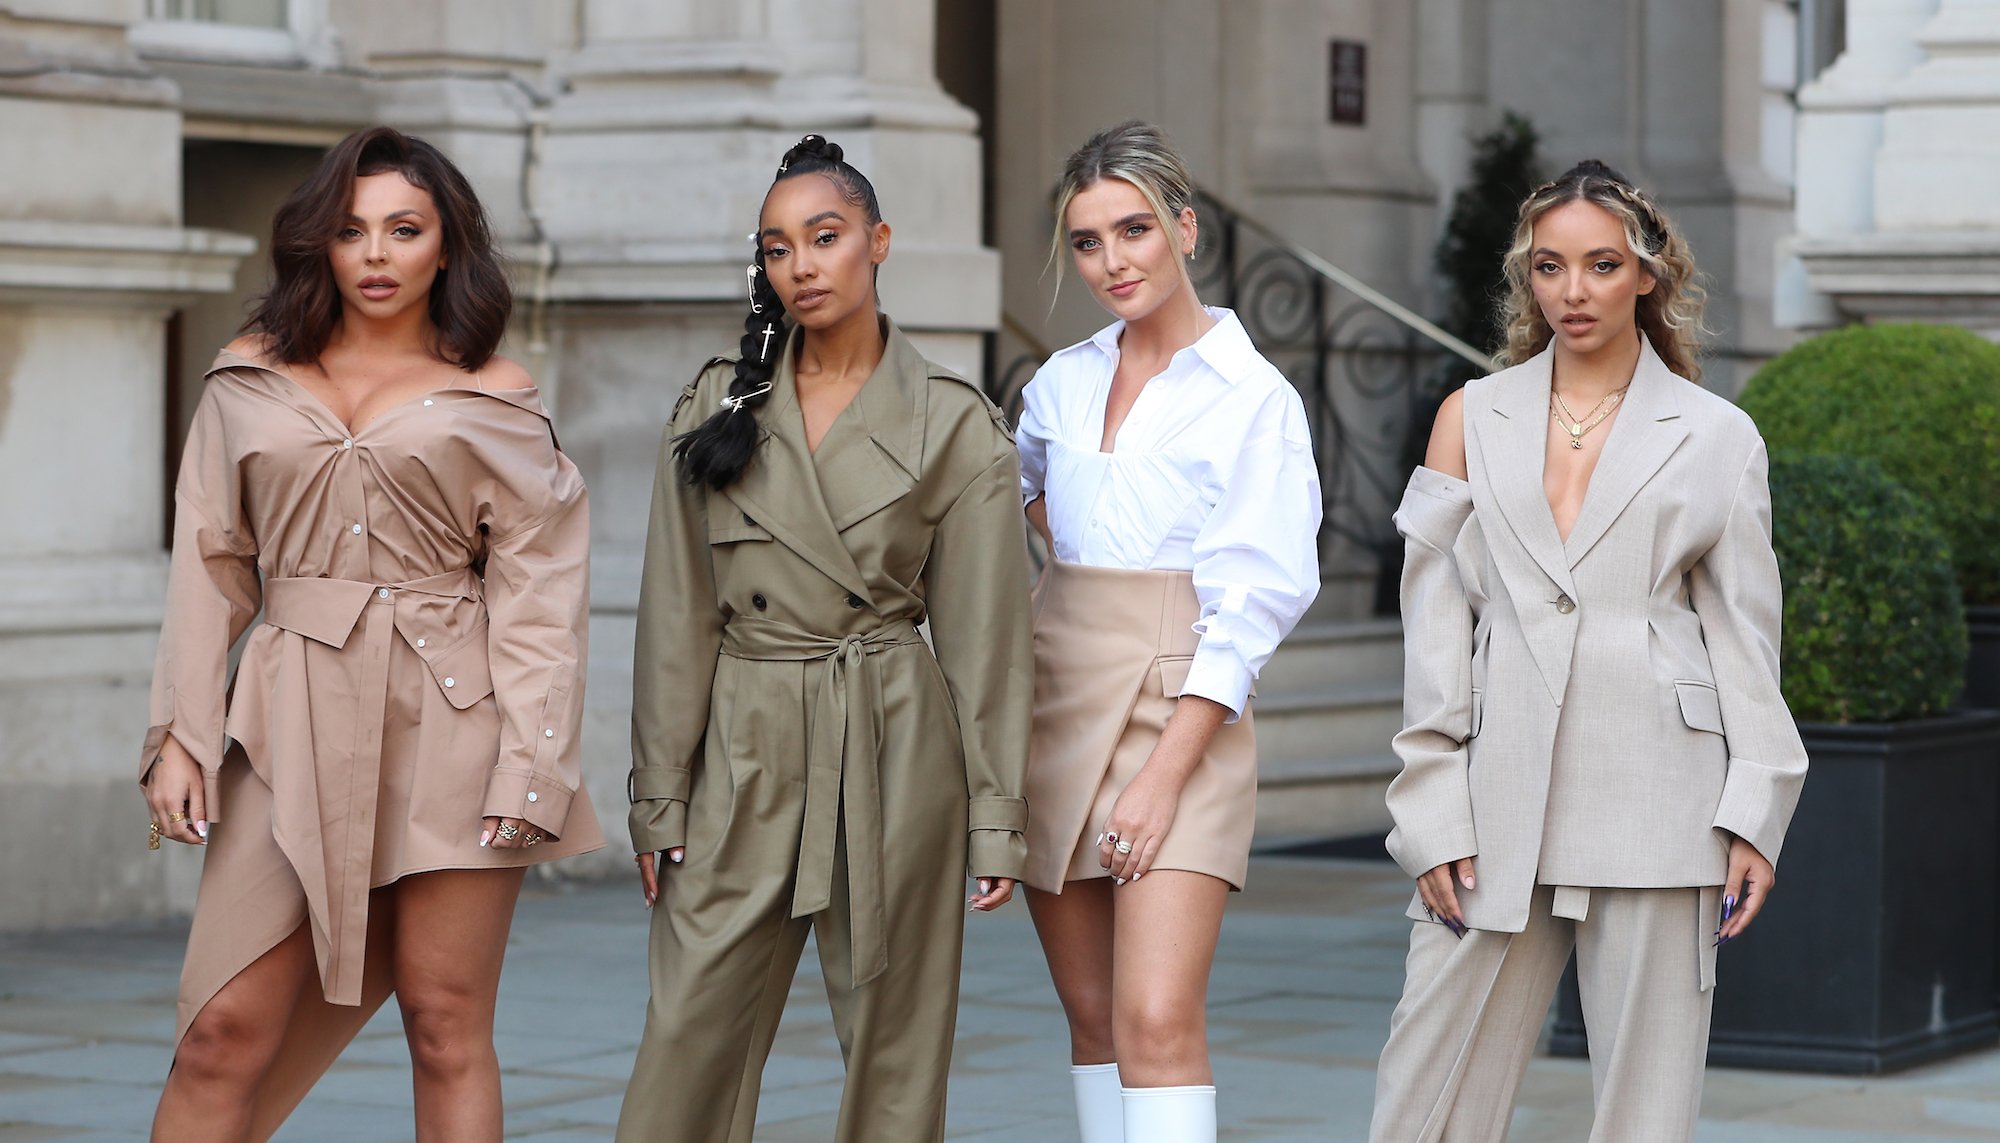 Does Harry Styles Make an Appearance on Little Mix’s New Album?